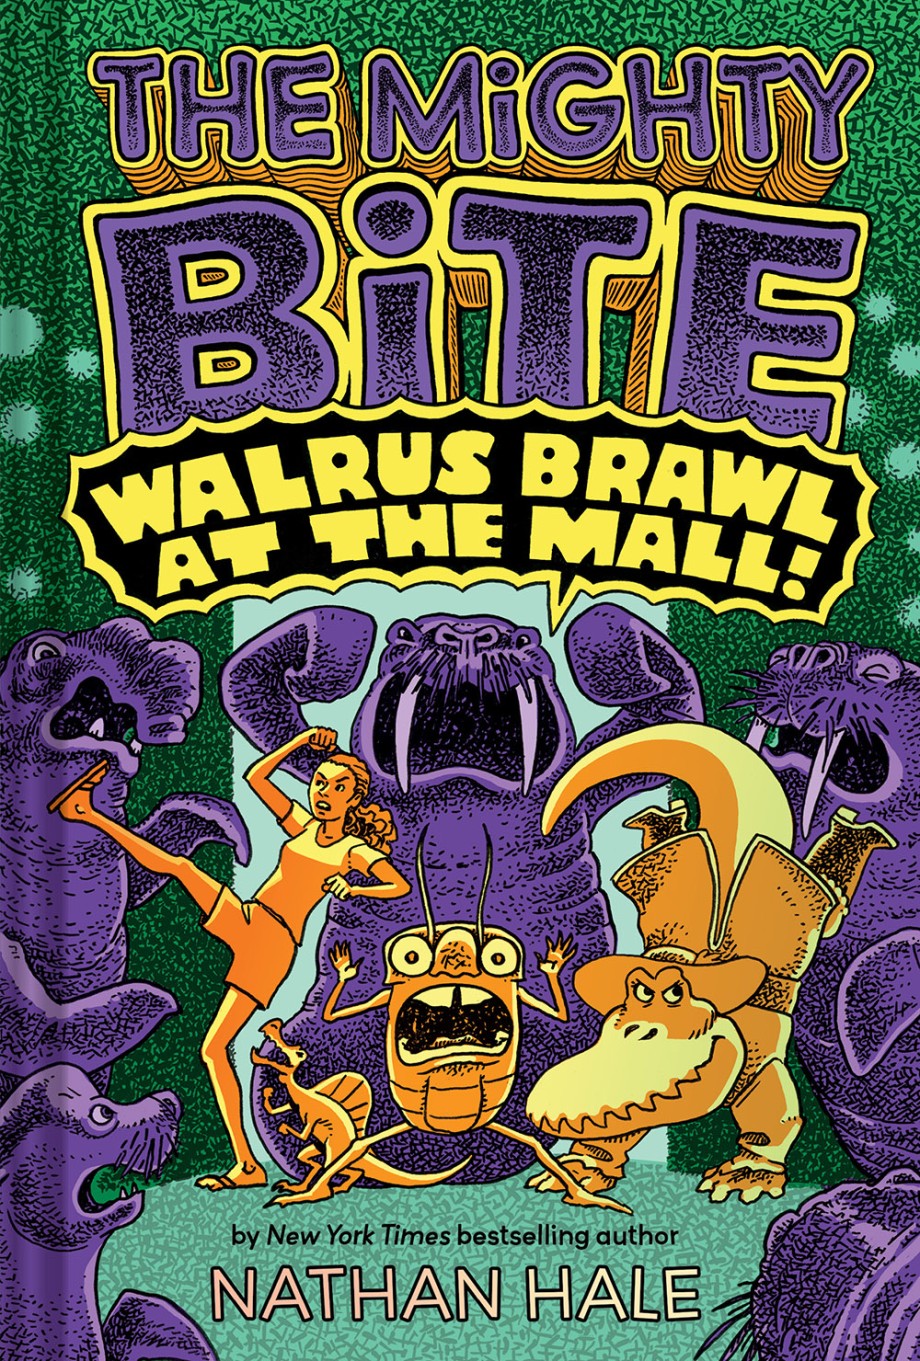 Mighty Bite #2: Walrus Brawl at the Mall A Graphic Novel